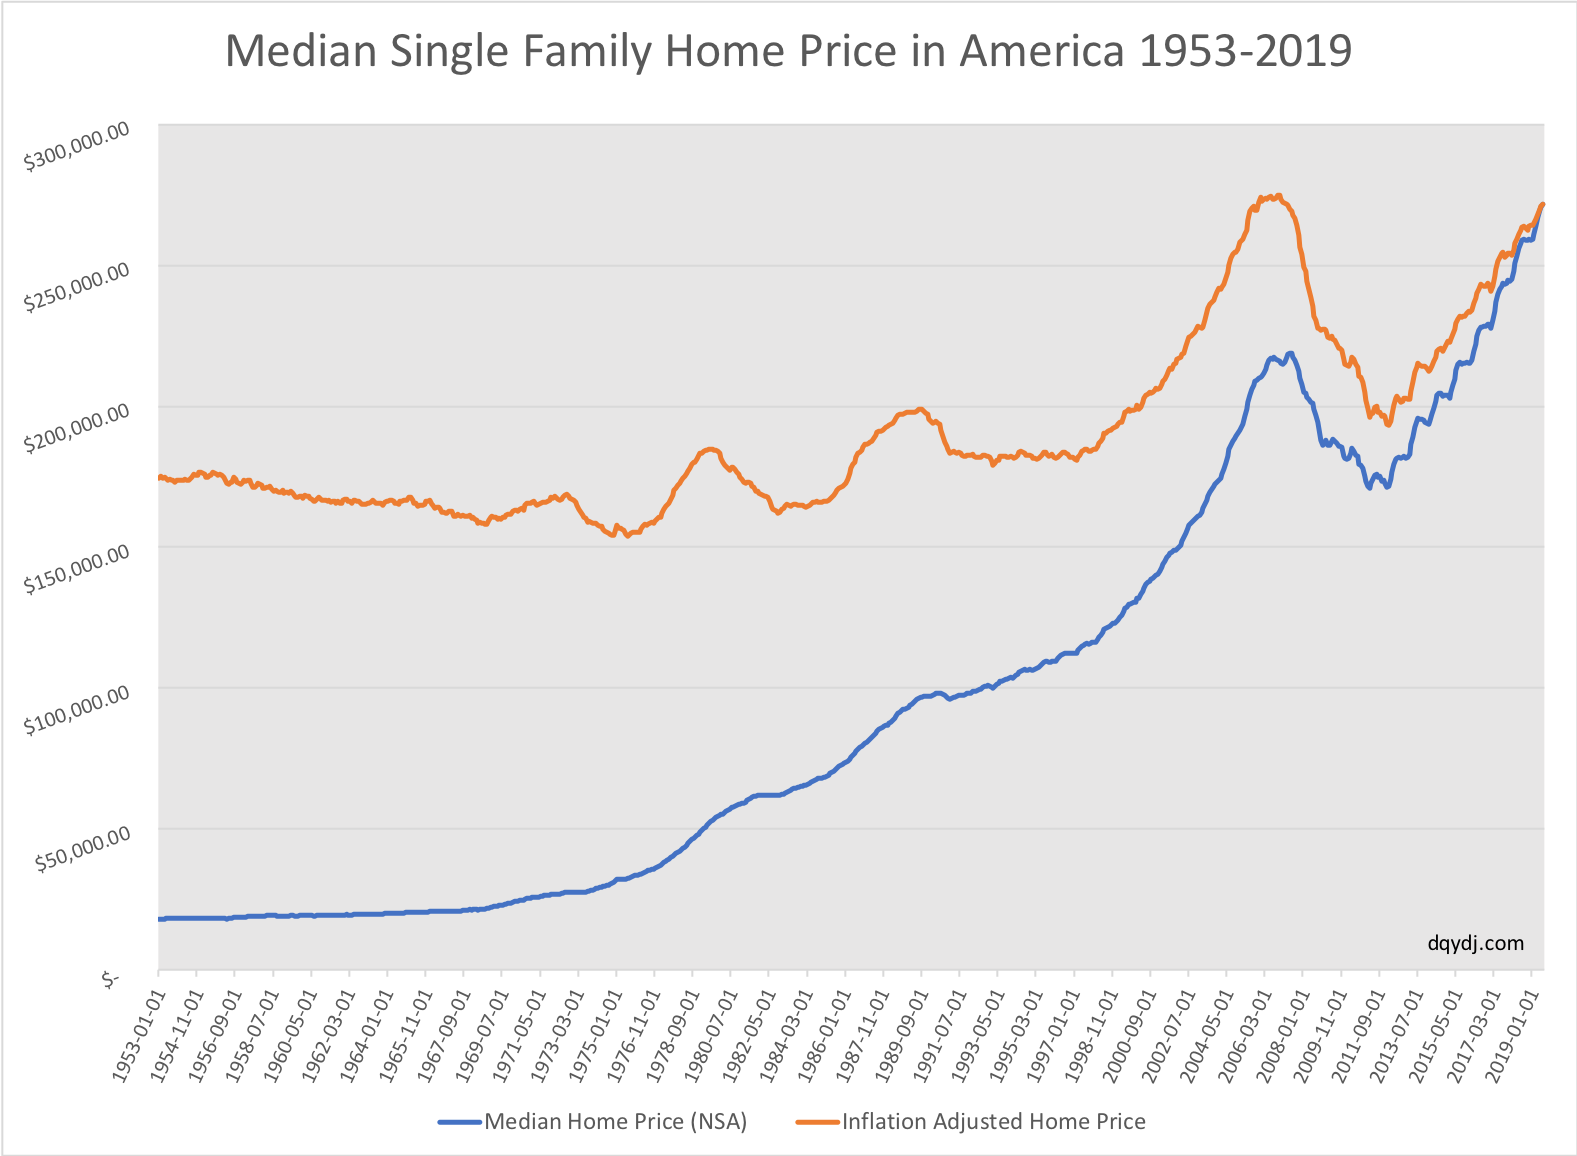 Historical median home value in the US, nominal and real